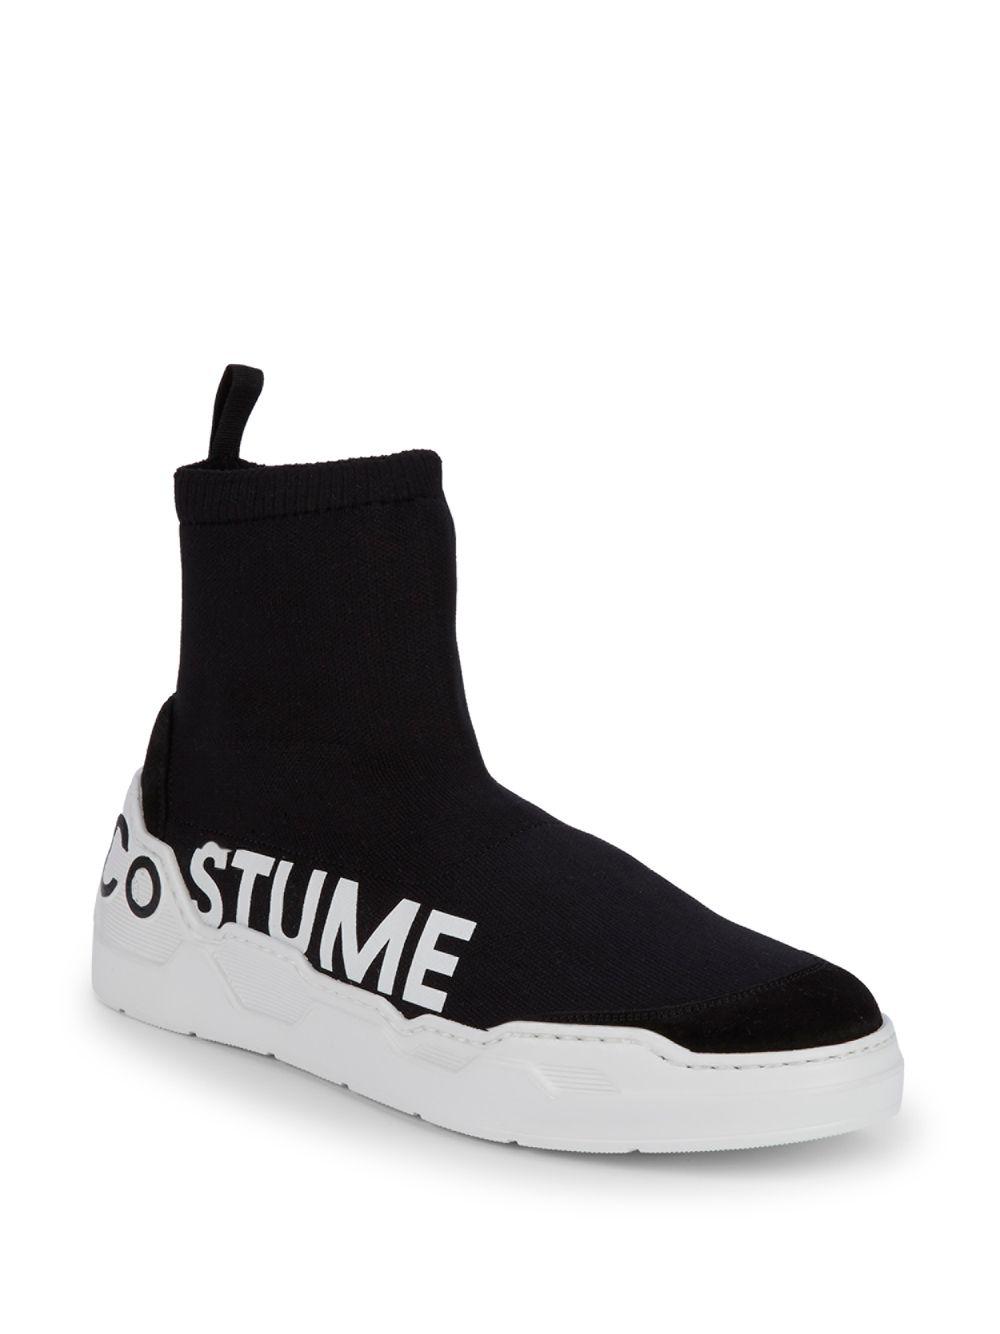 CoSTUME NATIONAL Leather Stretch Knit Sock Sneakers in Black for Men - Lyst